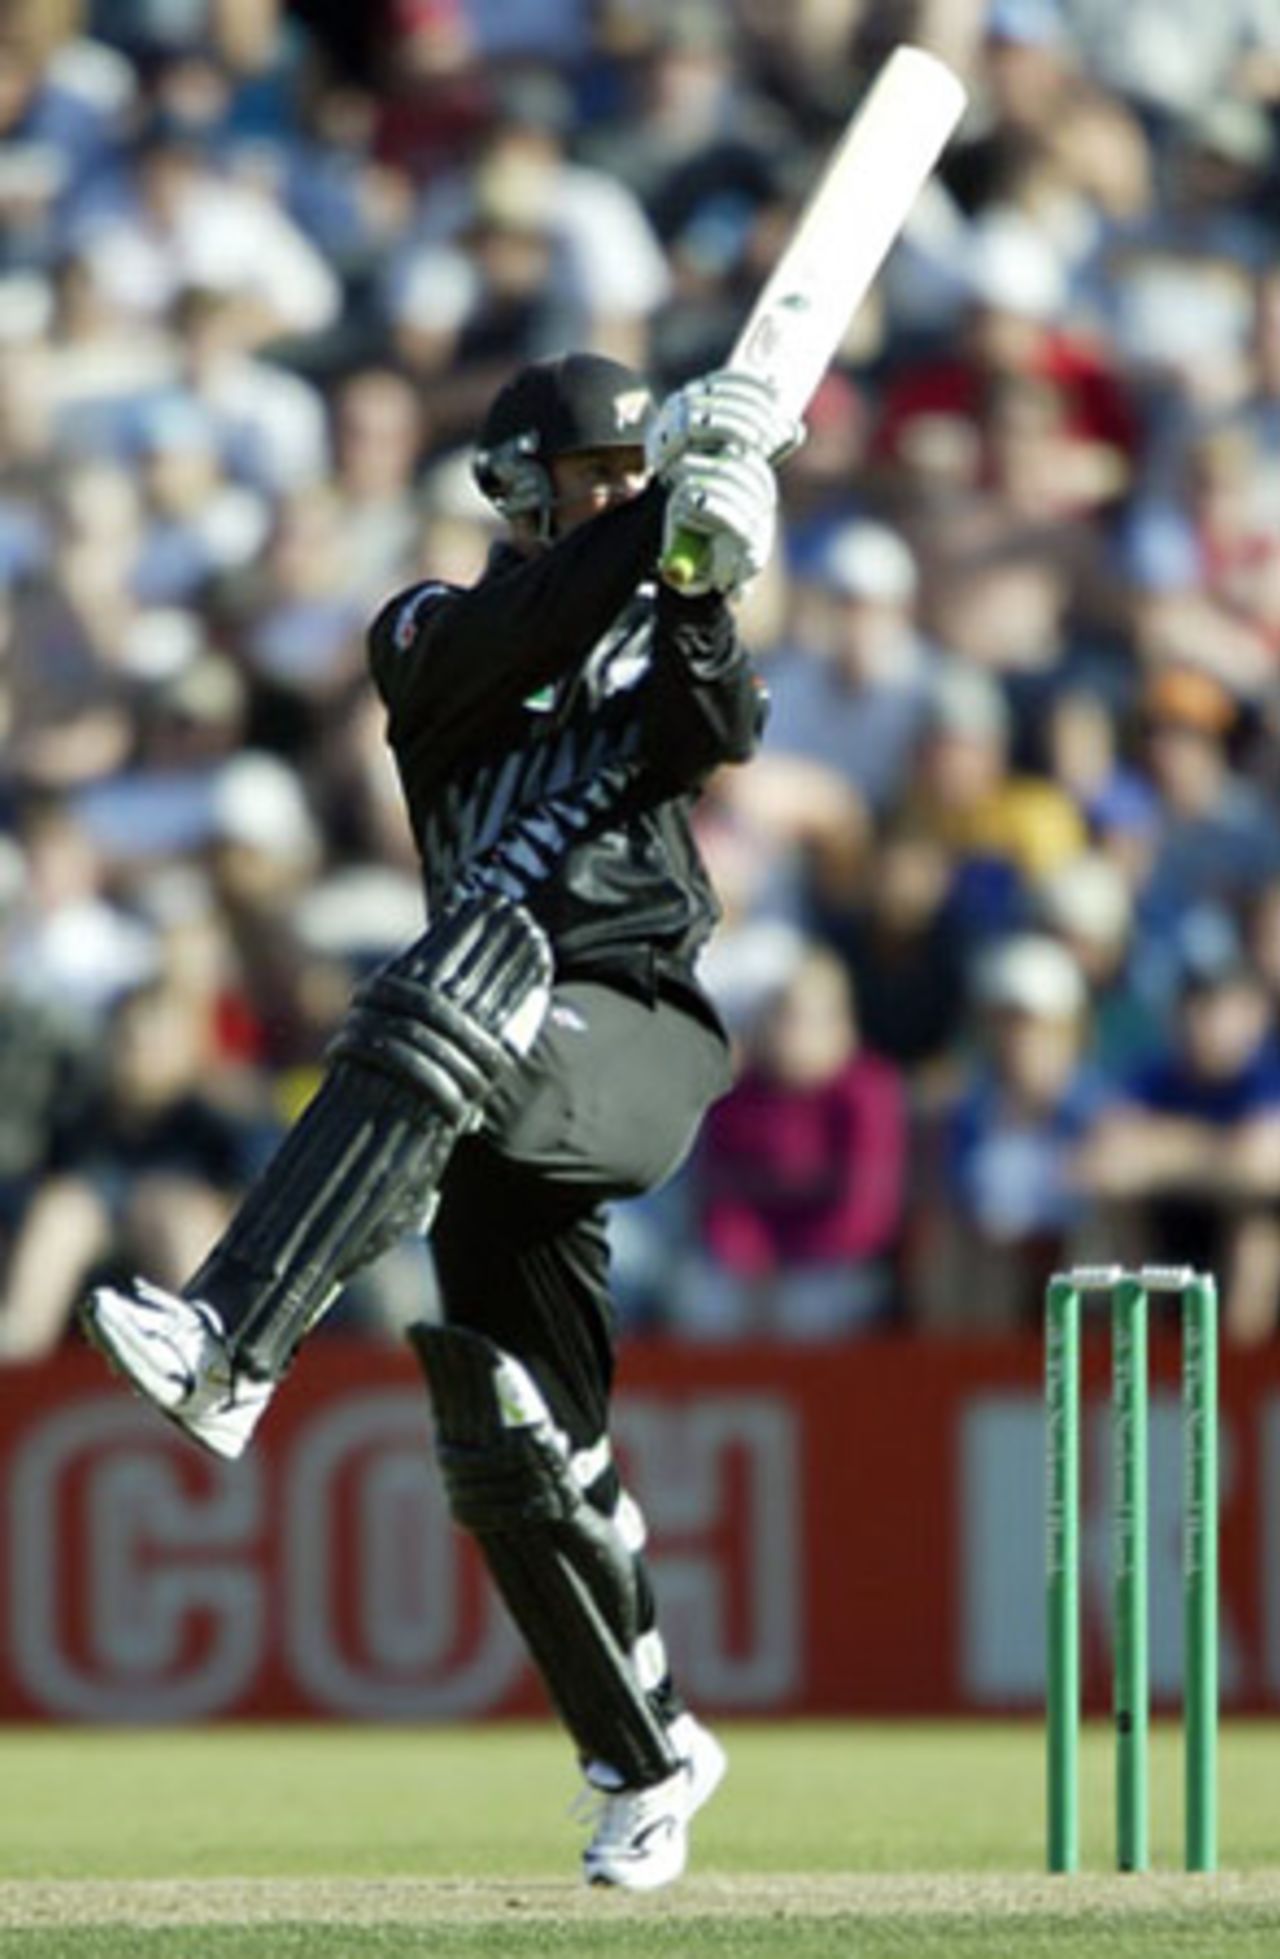 New Zealand batsman Nathan Astle pulls a delivery behind square on the leg side during his innings of 32. 3rd ODI: New Zealand v India at Jade Stadium, Christchurch, 1 January 2003.